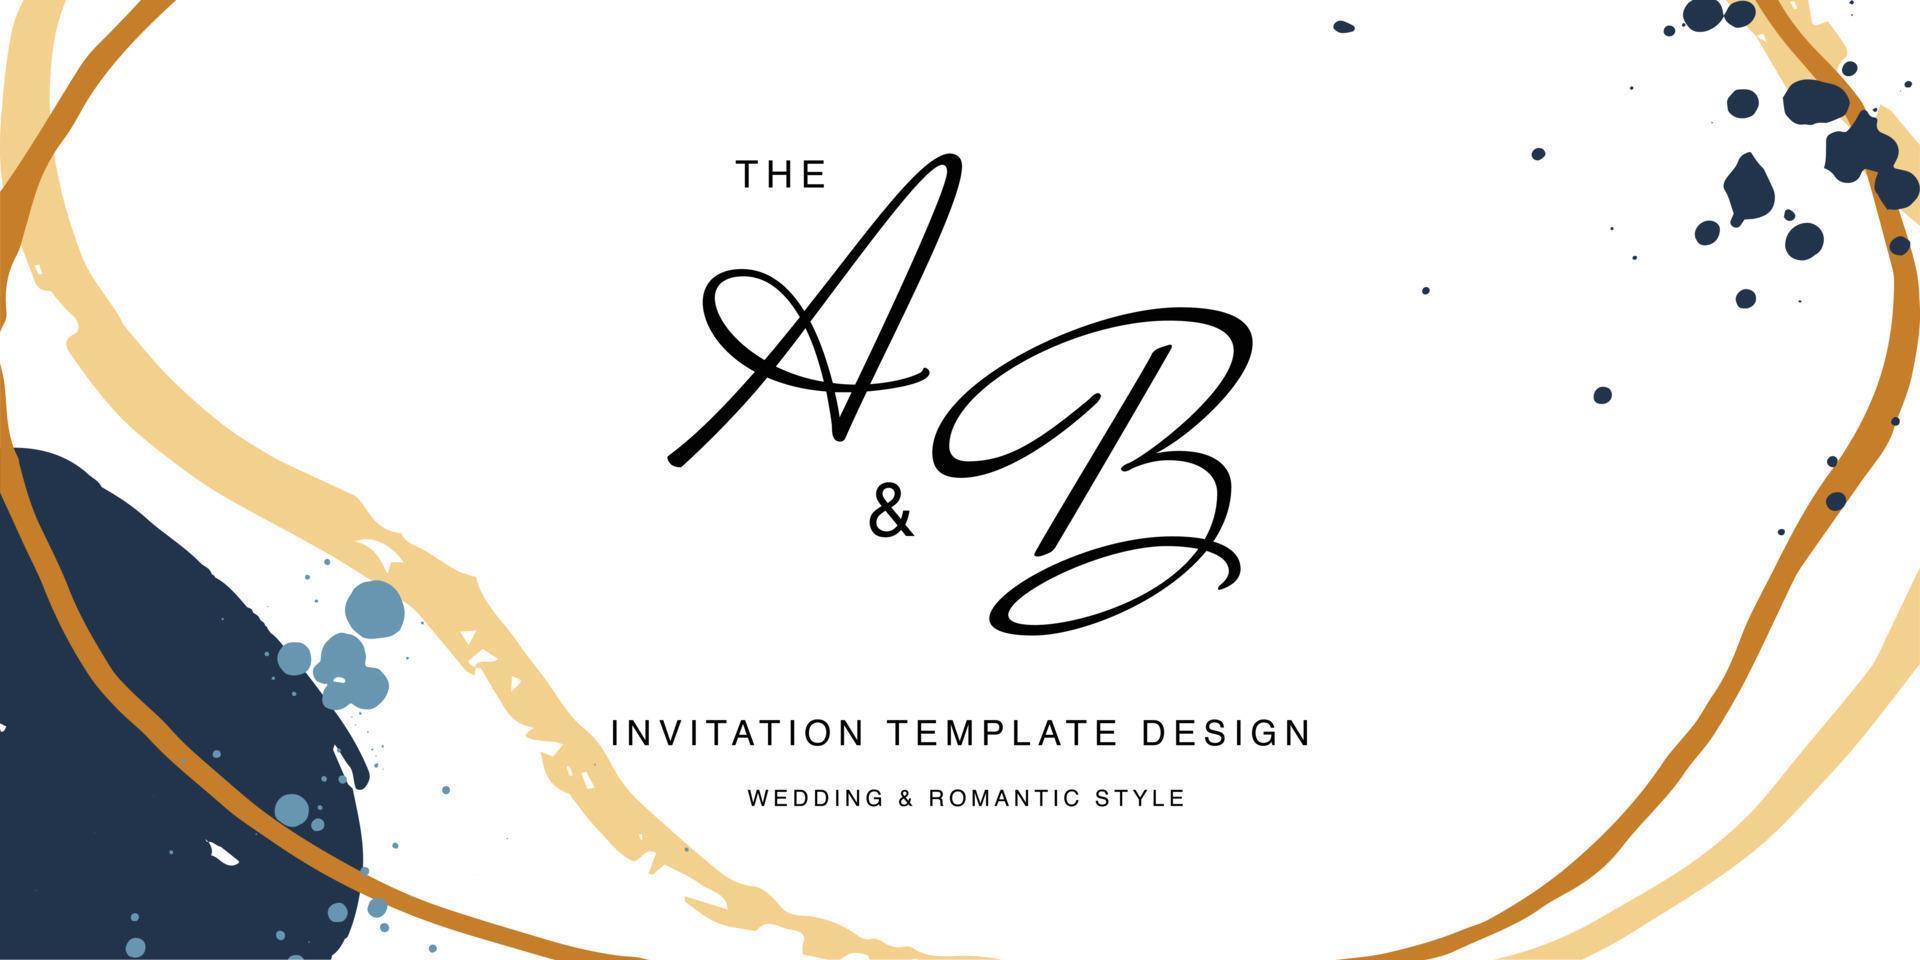 Minimalist design for wedding invitation card templates. Simple brush stroke backgrounds in vintage themes for greeting cards. Premium and elegance design graphic vector